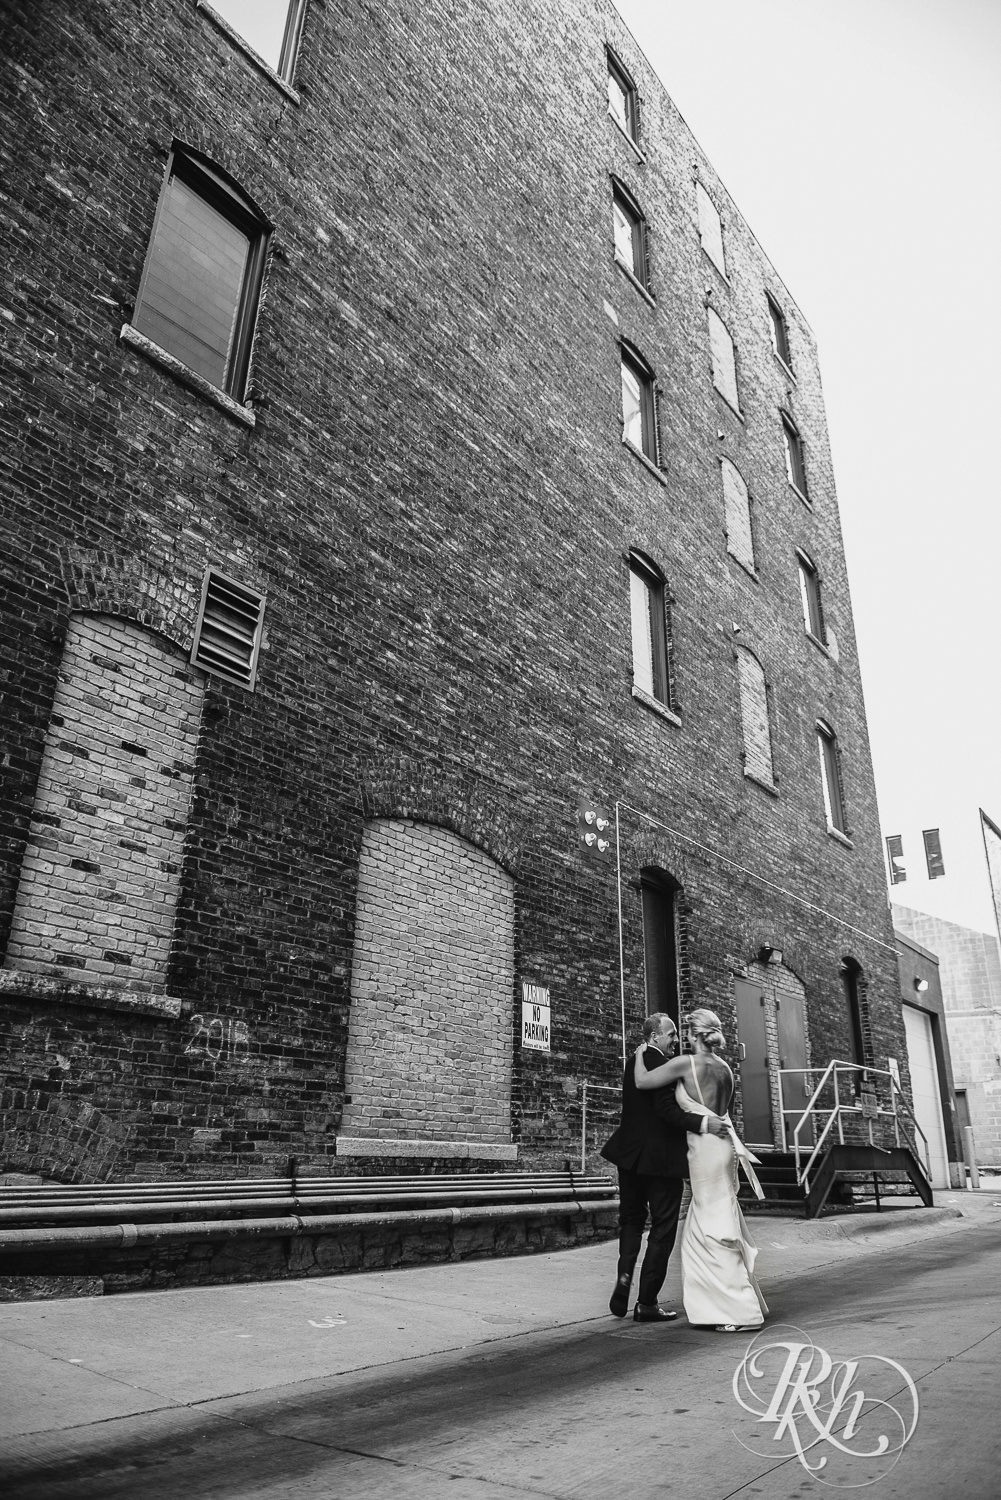 Bride and groom dance in an alley on their wedding day in Minneapolis, Minnesota.